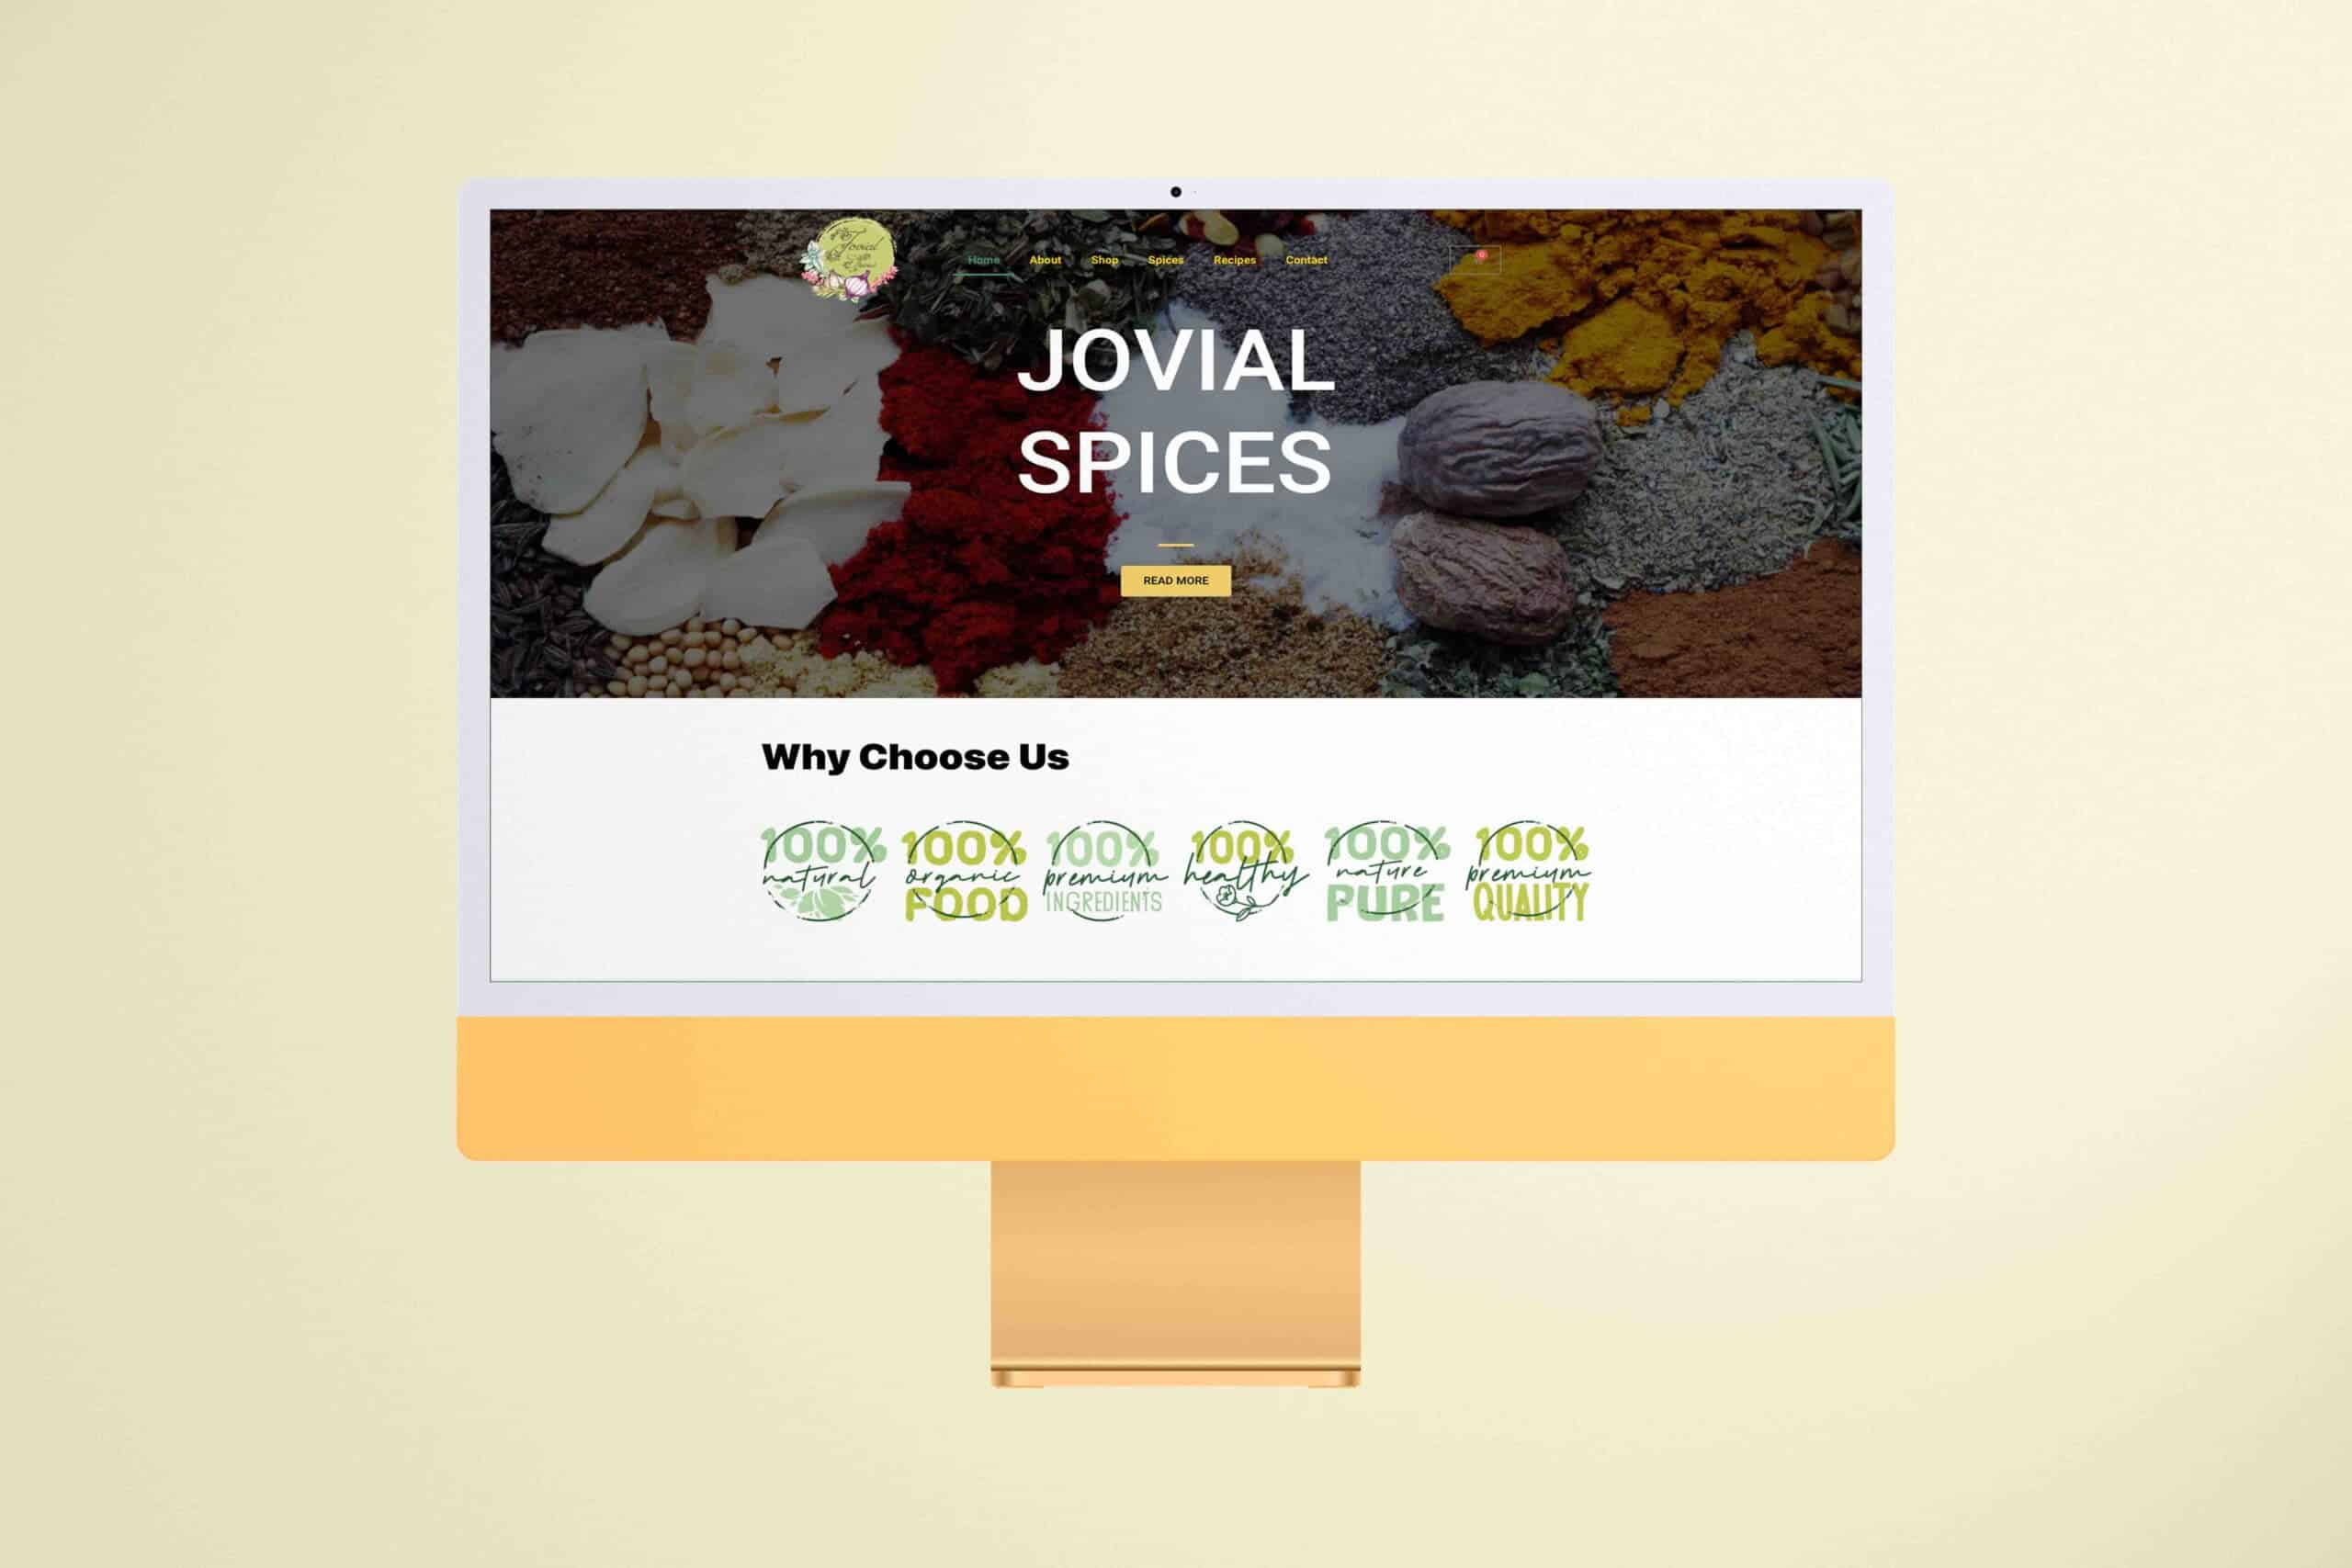 Jovial Spices